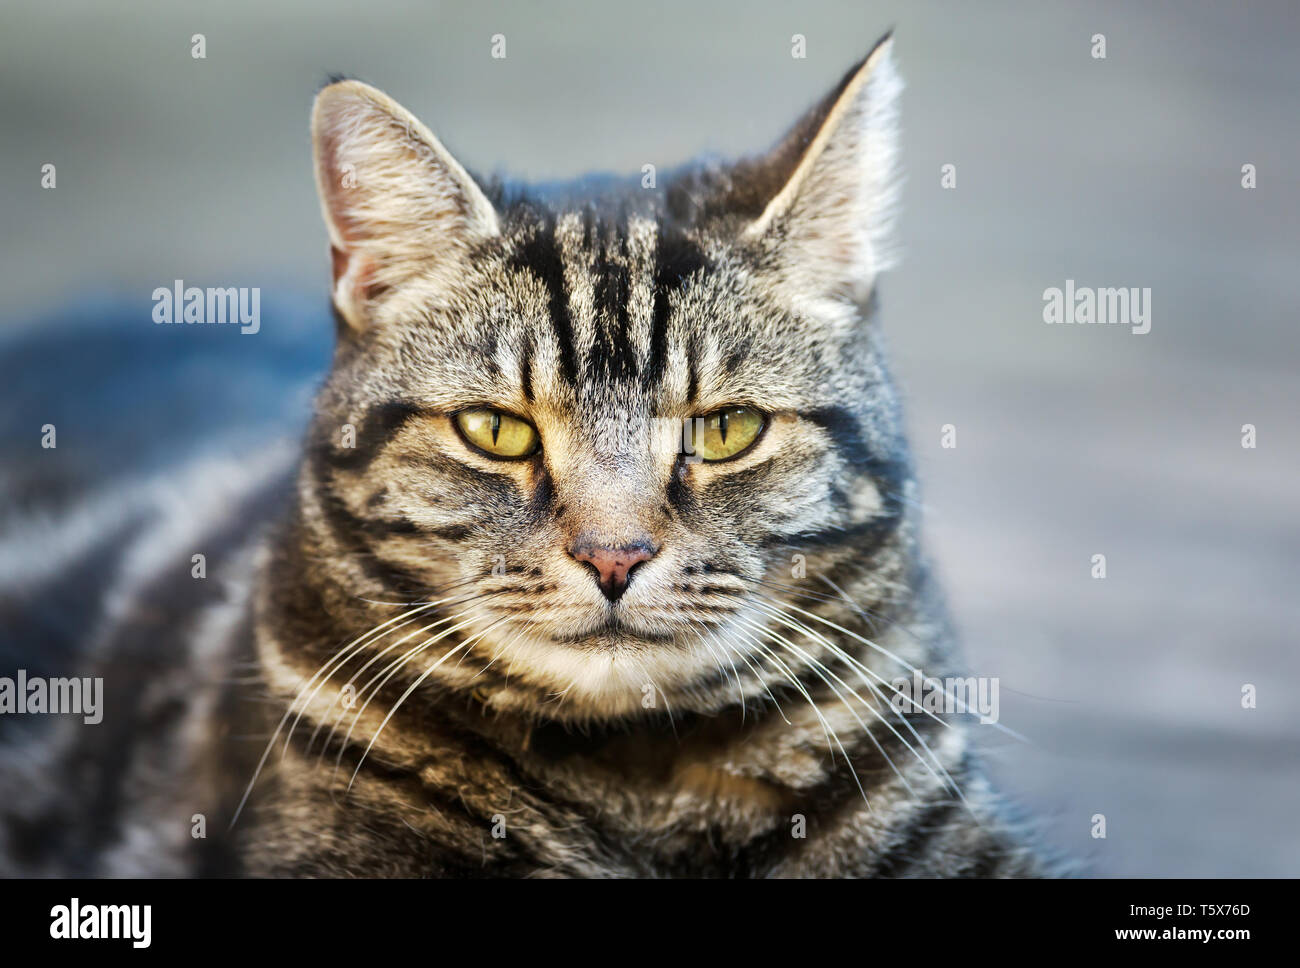 Close up of a tabby cat lying in the garden Stock Photo